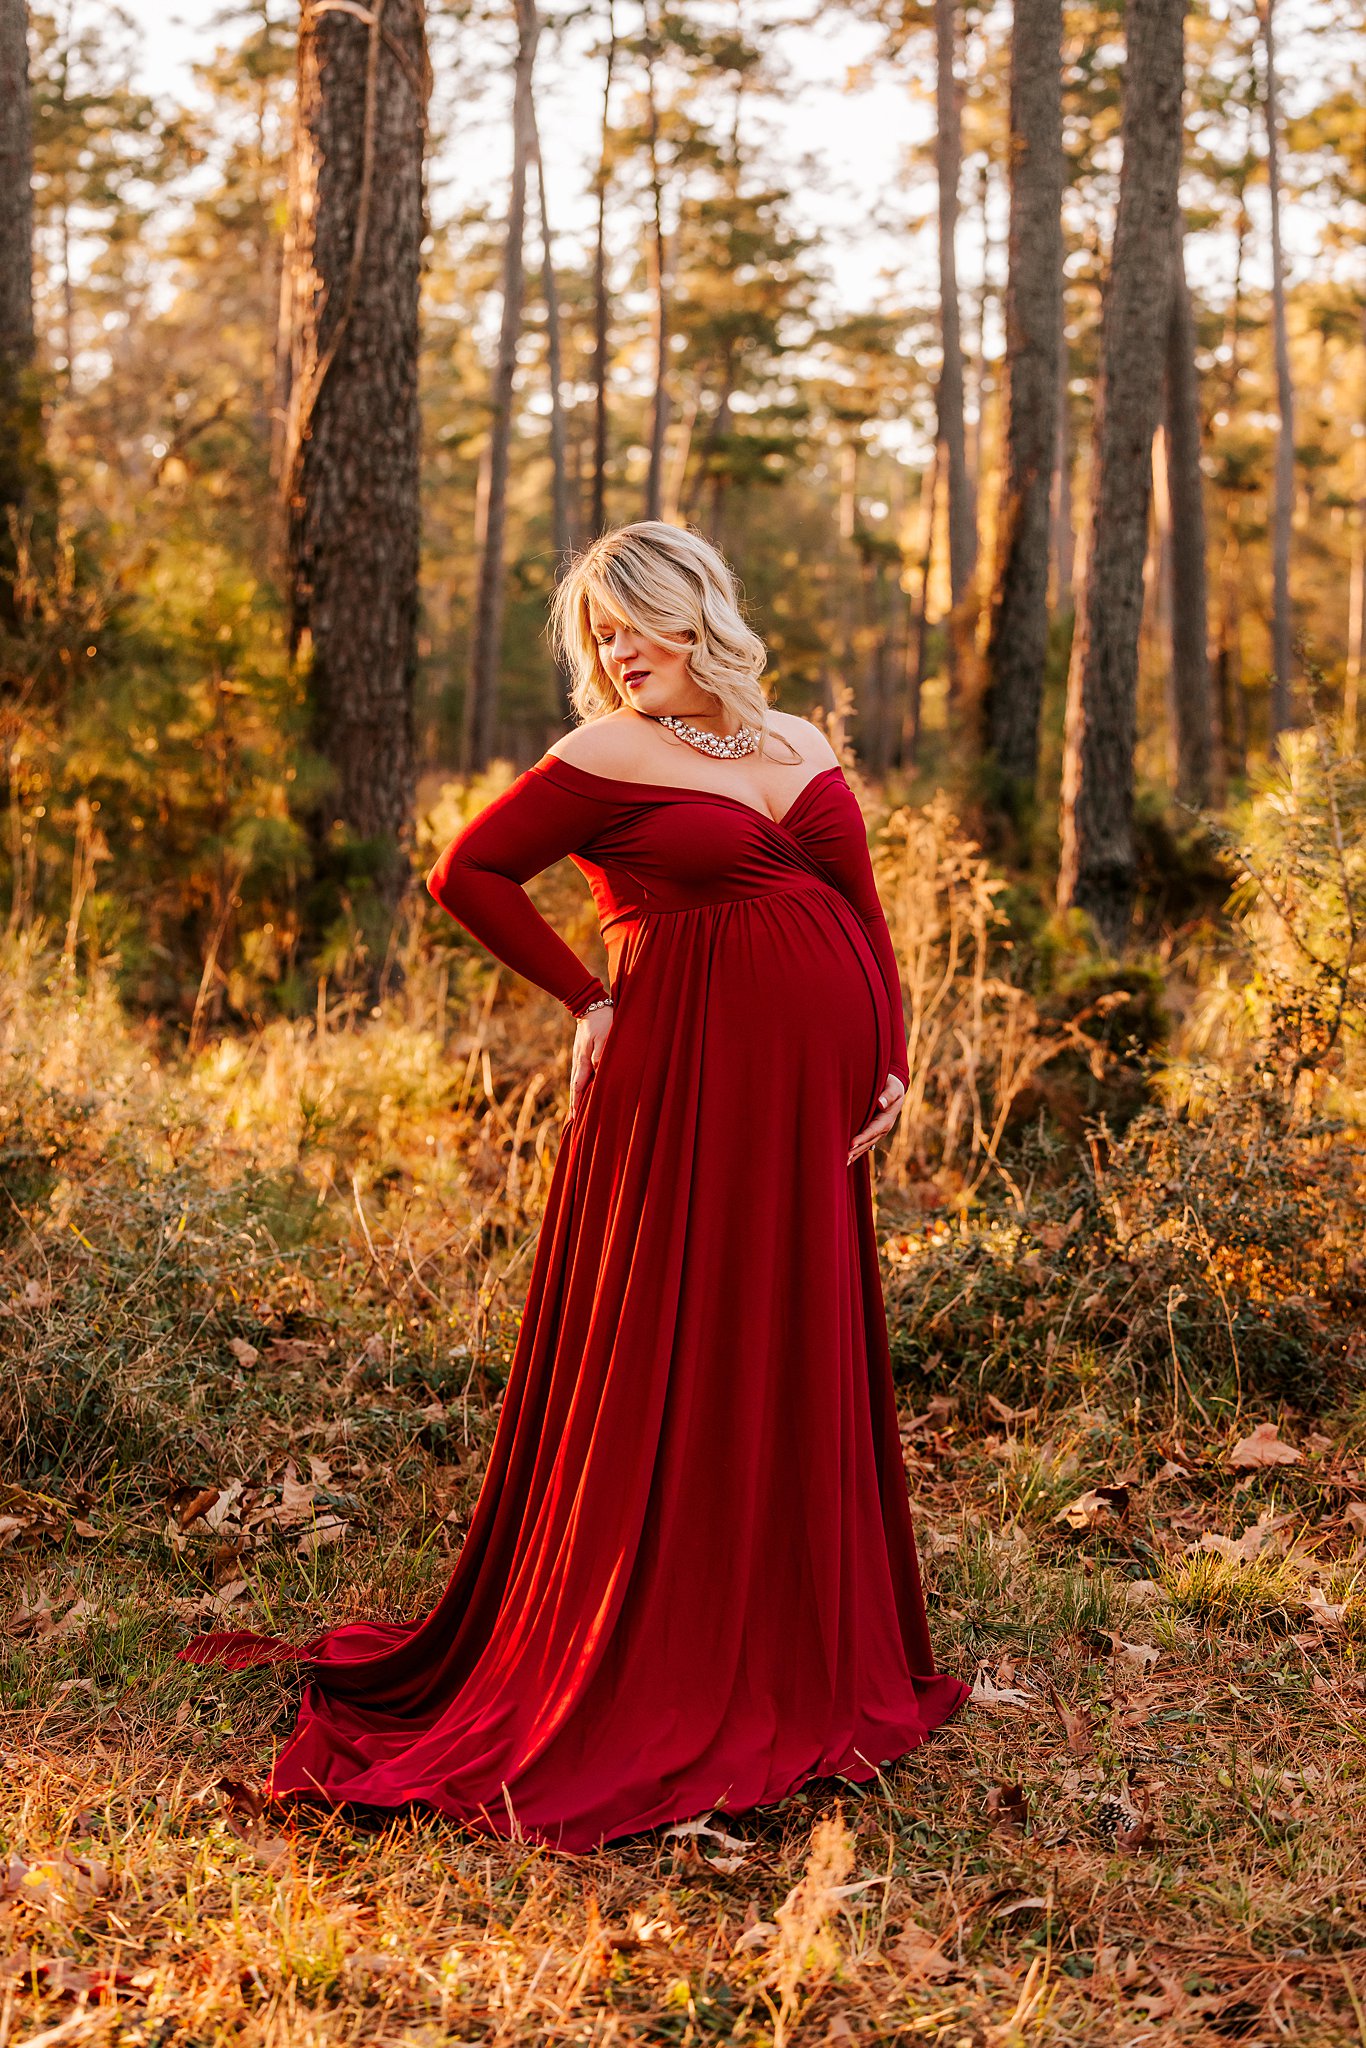 Mother to be stands in the forest holding her bump in a red maternity gown